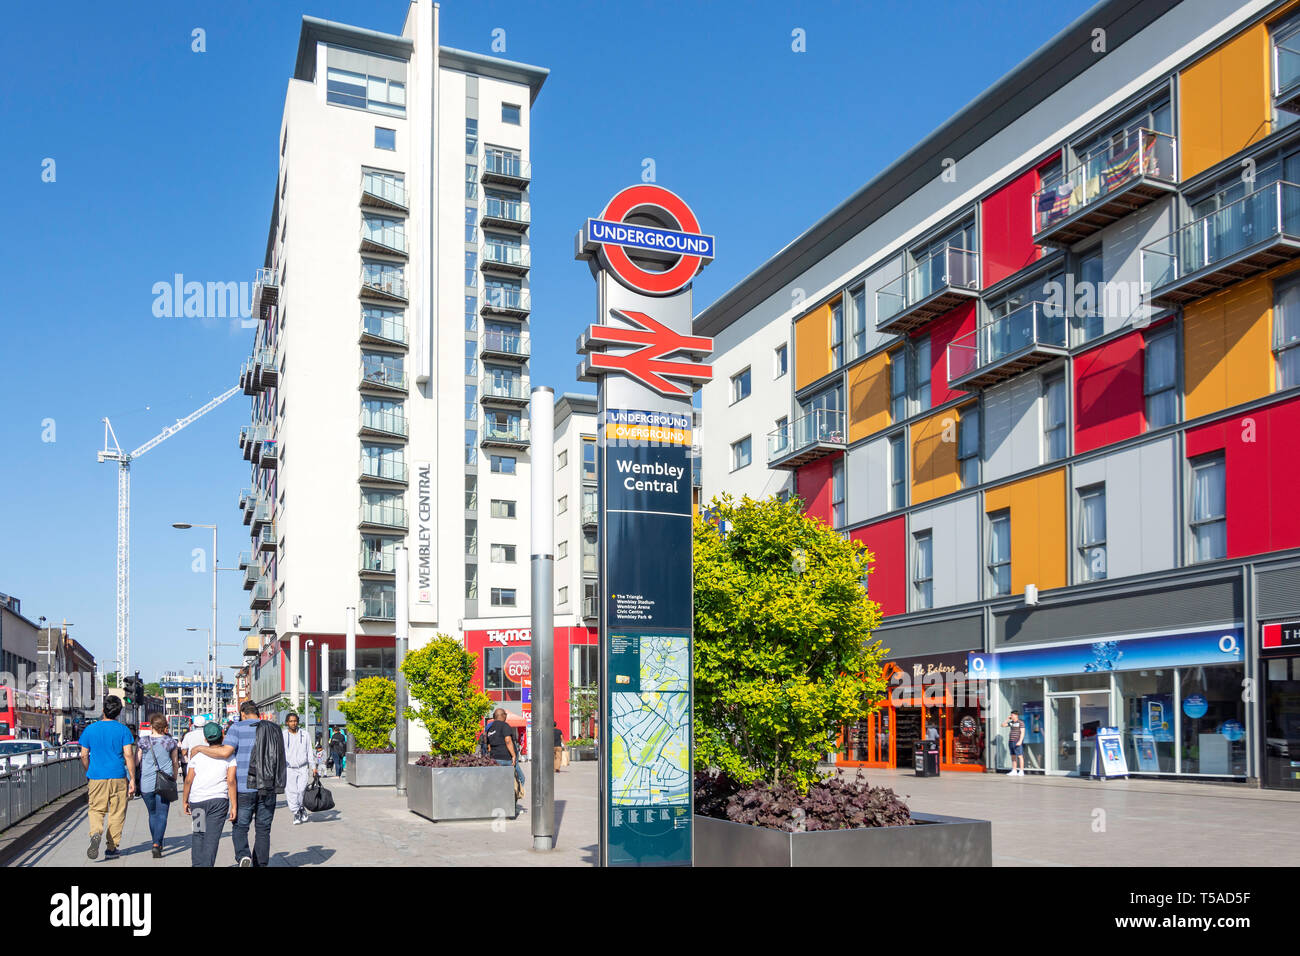 Wembley Central Square, High Road, Wembley, London Borough of Brent, Greater London, England, Regno Unito Foto Stock